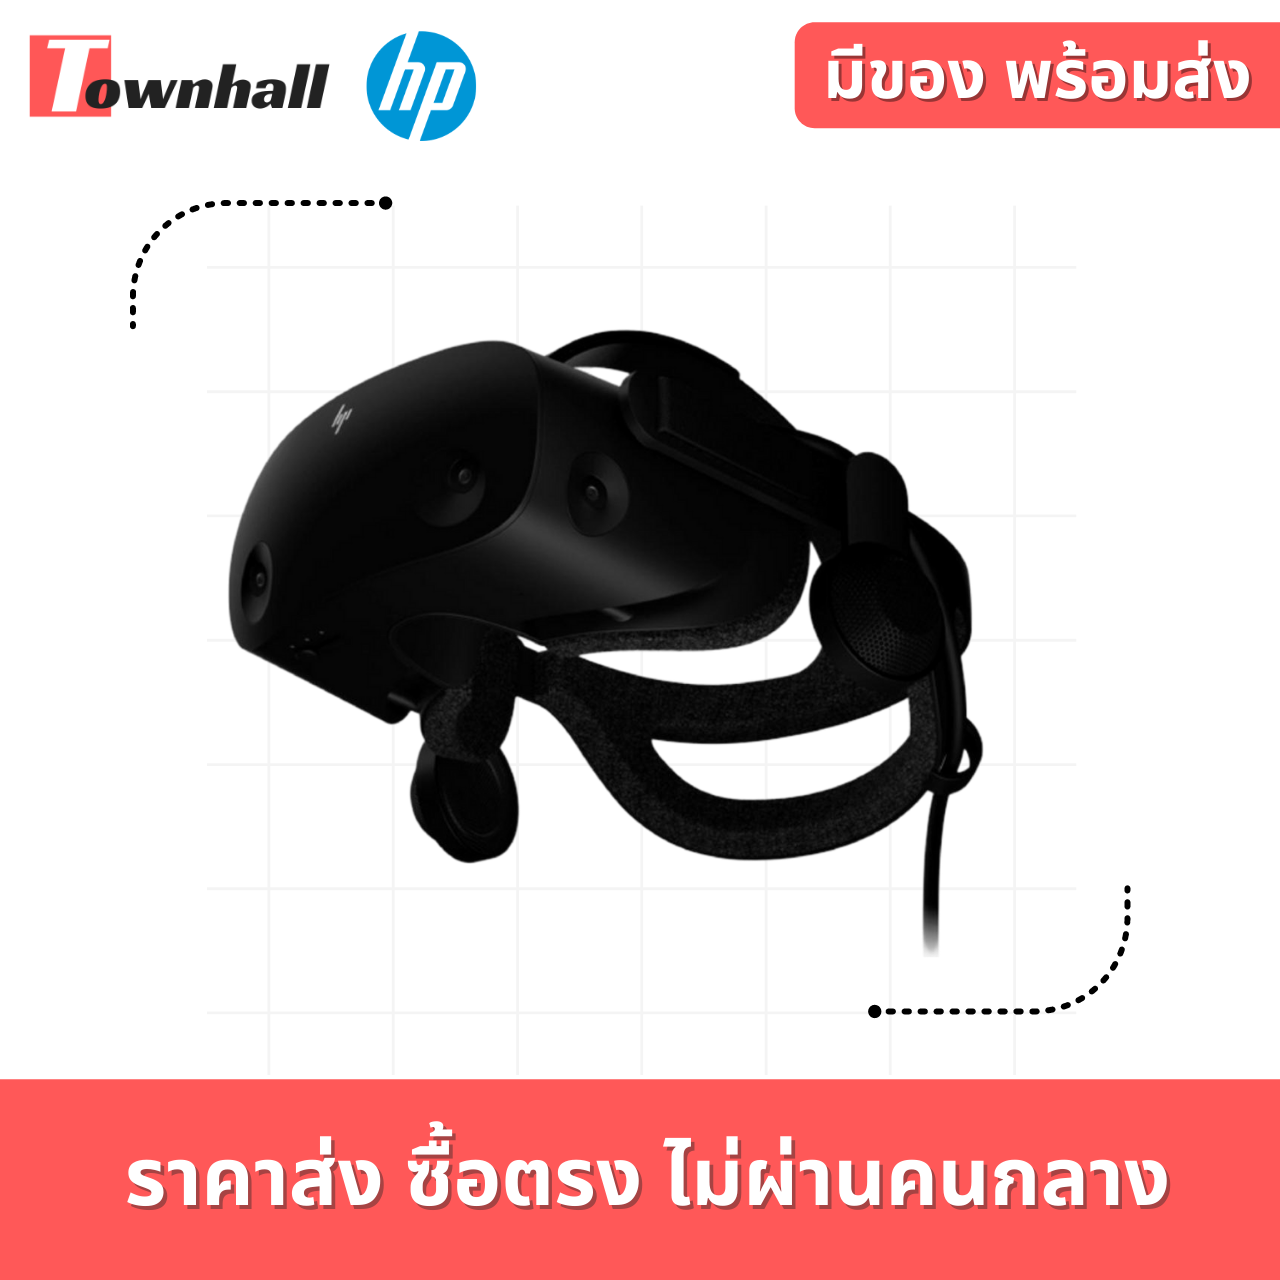 HP Reverb G2 The no-compromise VR headset